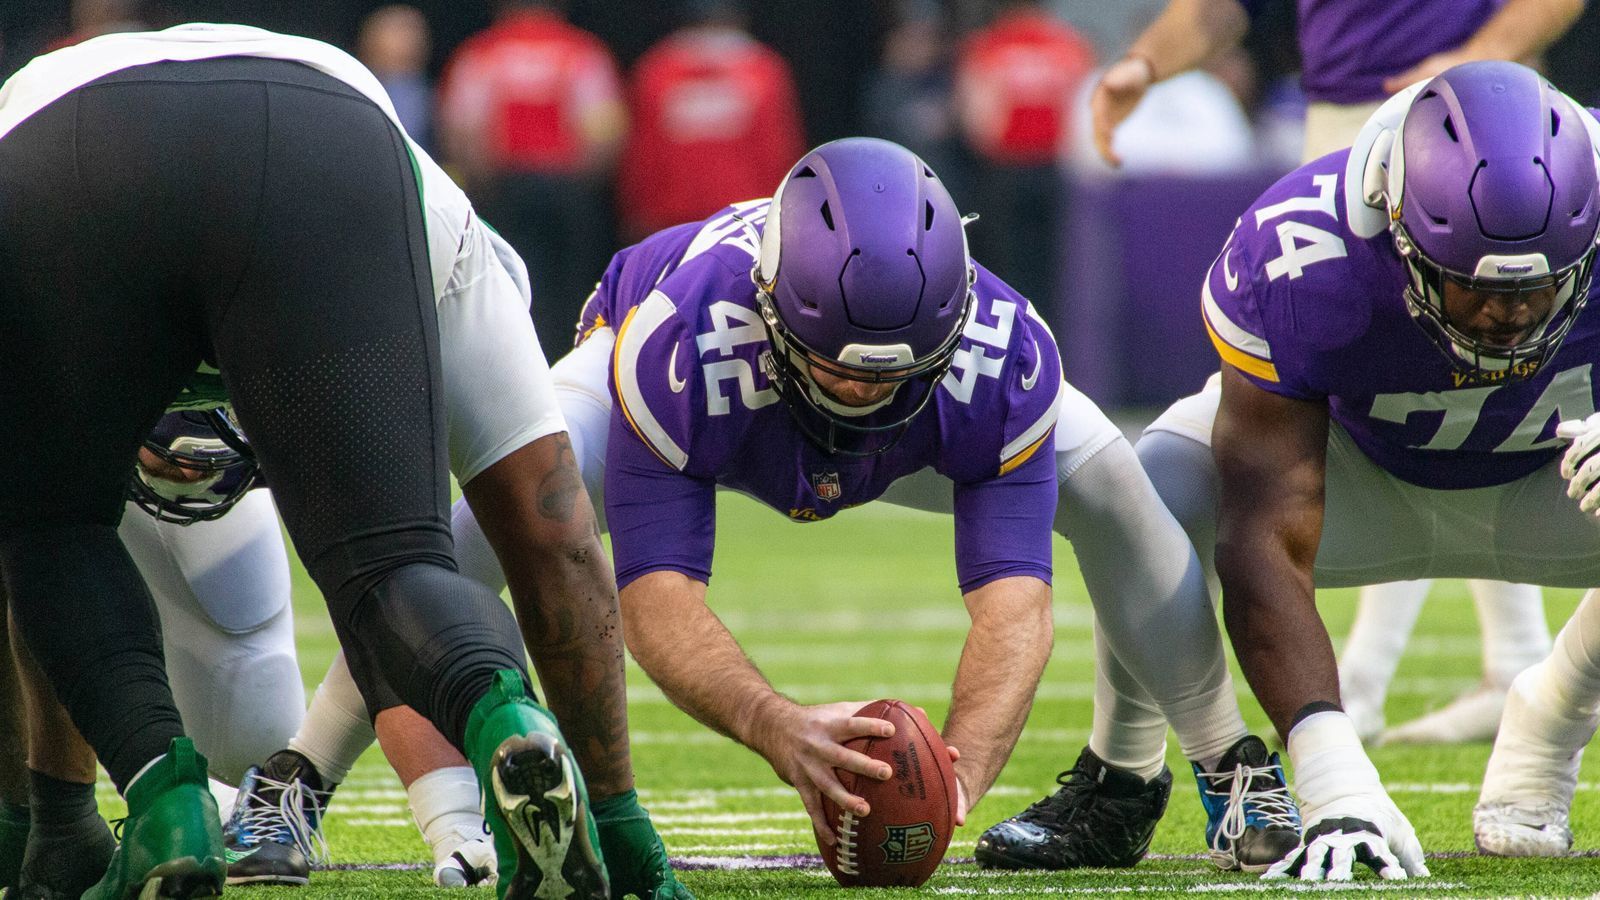 
                <strong>Andrew DePaola</strong><br>
                Position: Long SnapperTeam: Minnesota Vikings
              